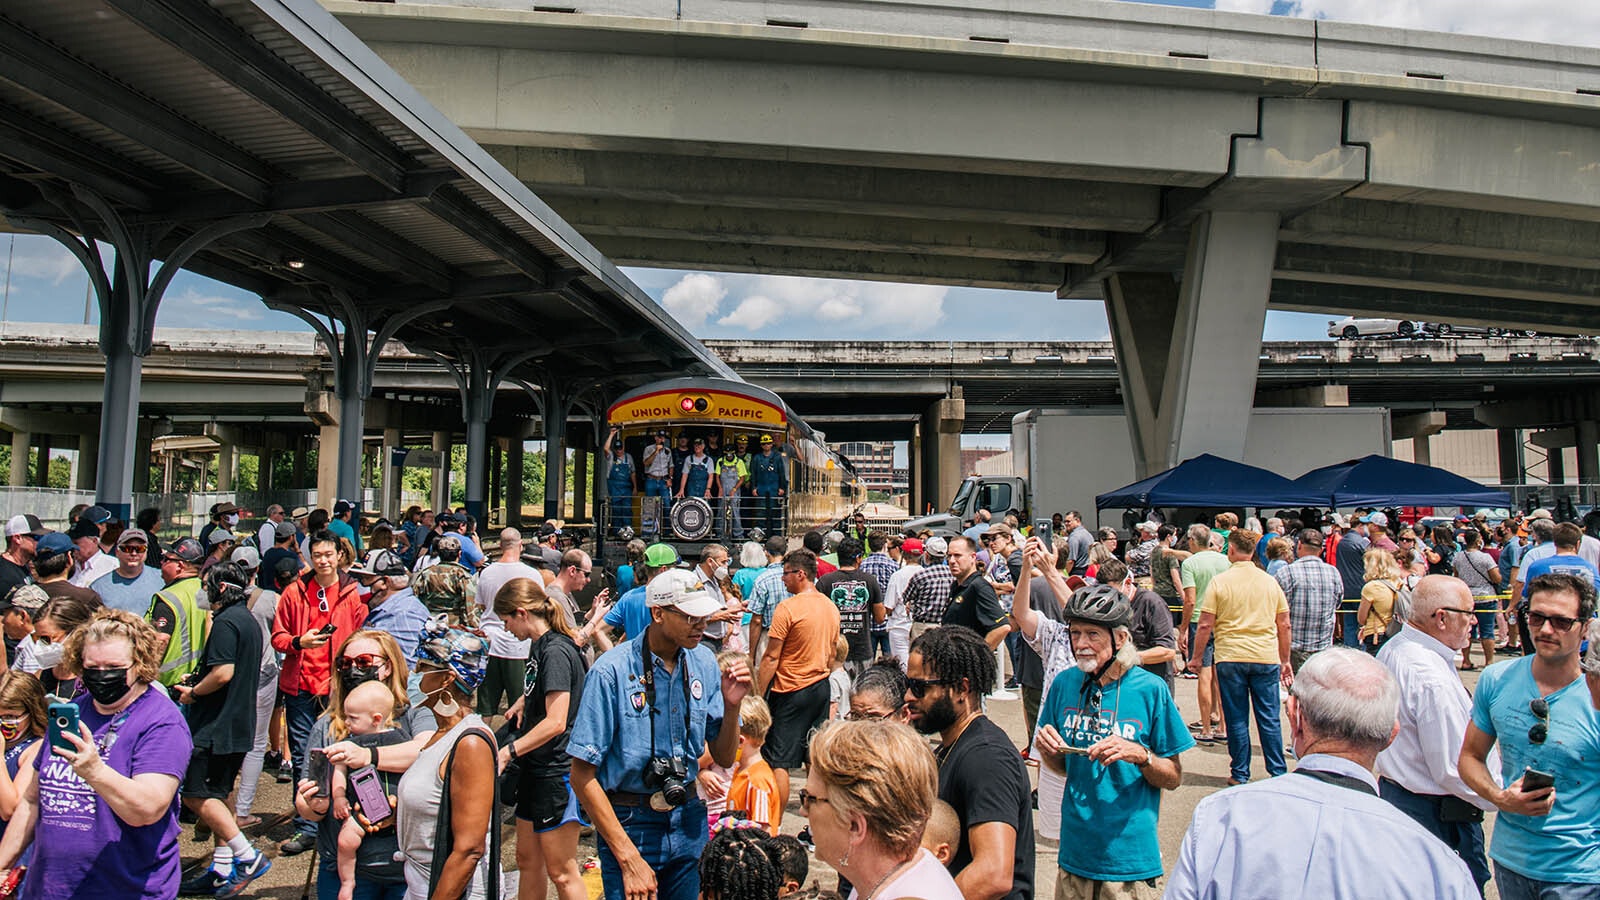 A huge crowd turned out to see Big Boy 4014 when it pulled into the station in Houston, Texas, in summer 2021.